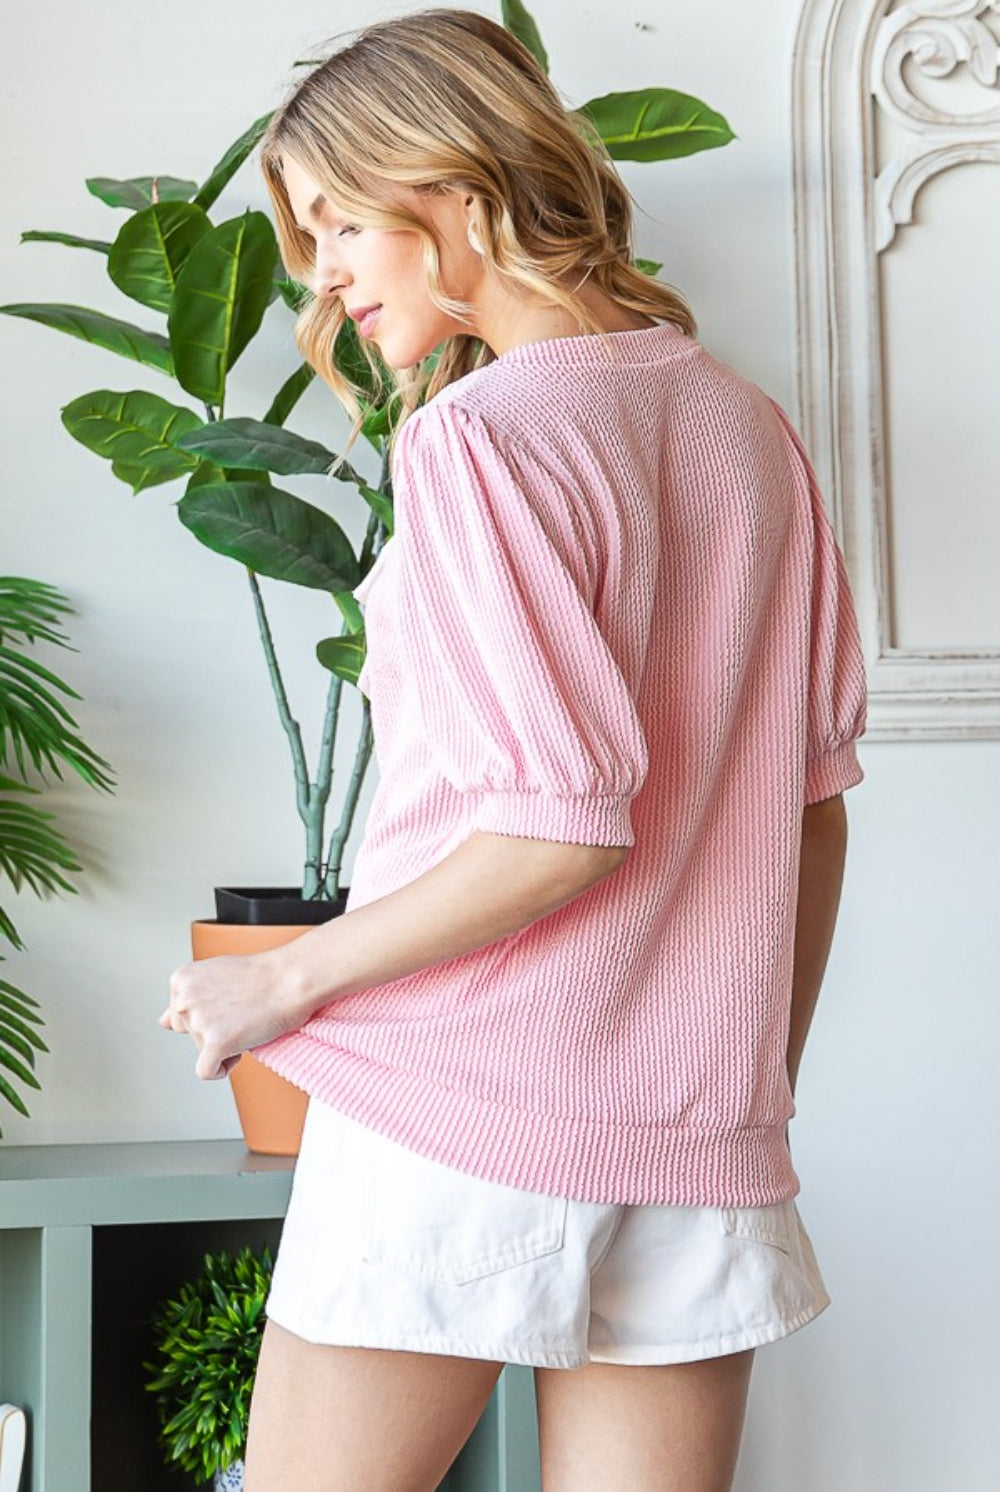 A poised woman in a sweet pink striped half sleeve top with a white bow accent, paired with white shorts, creating a fresh and stylish ensemble perfect for a sunny day.